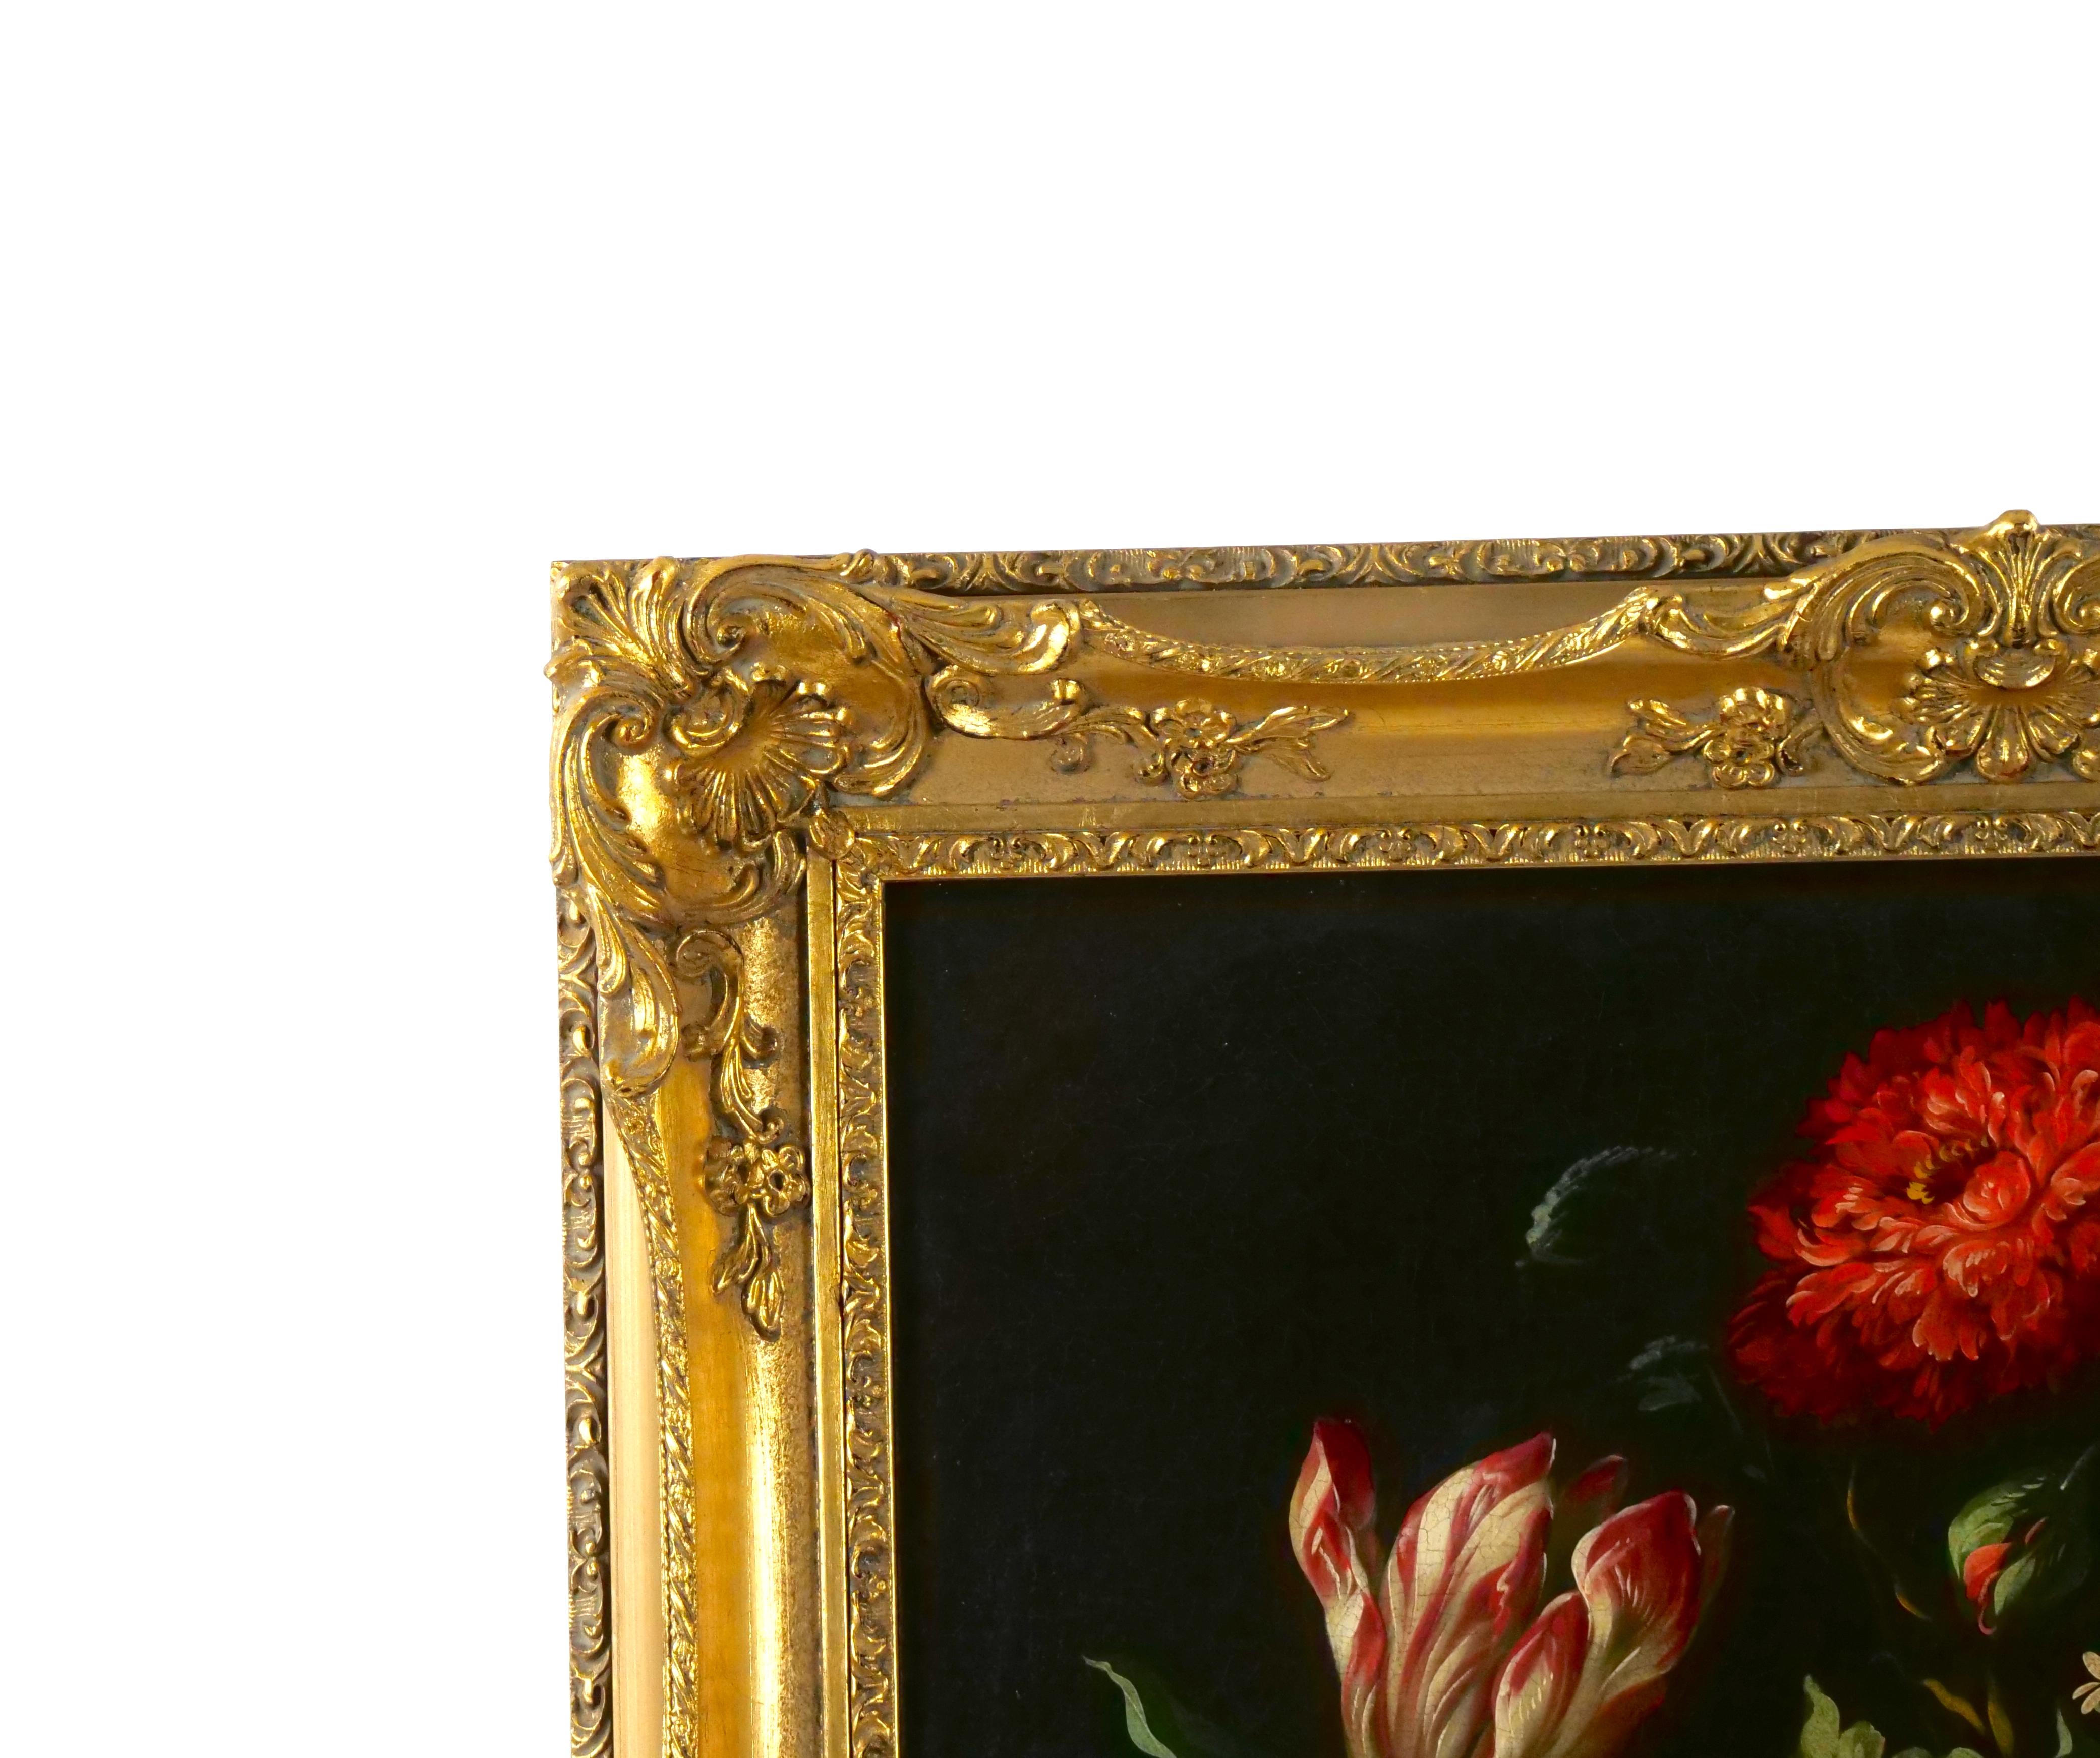 Transport yourself to the elegance of the 19th century with this captivating Gilt Wood Framed Oil on Canvas Wreath/Flower Still Life Painting. Meticulously created, this piece encapsulates the timeless allure of nature's beauty. The intricate